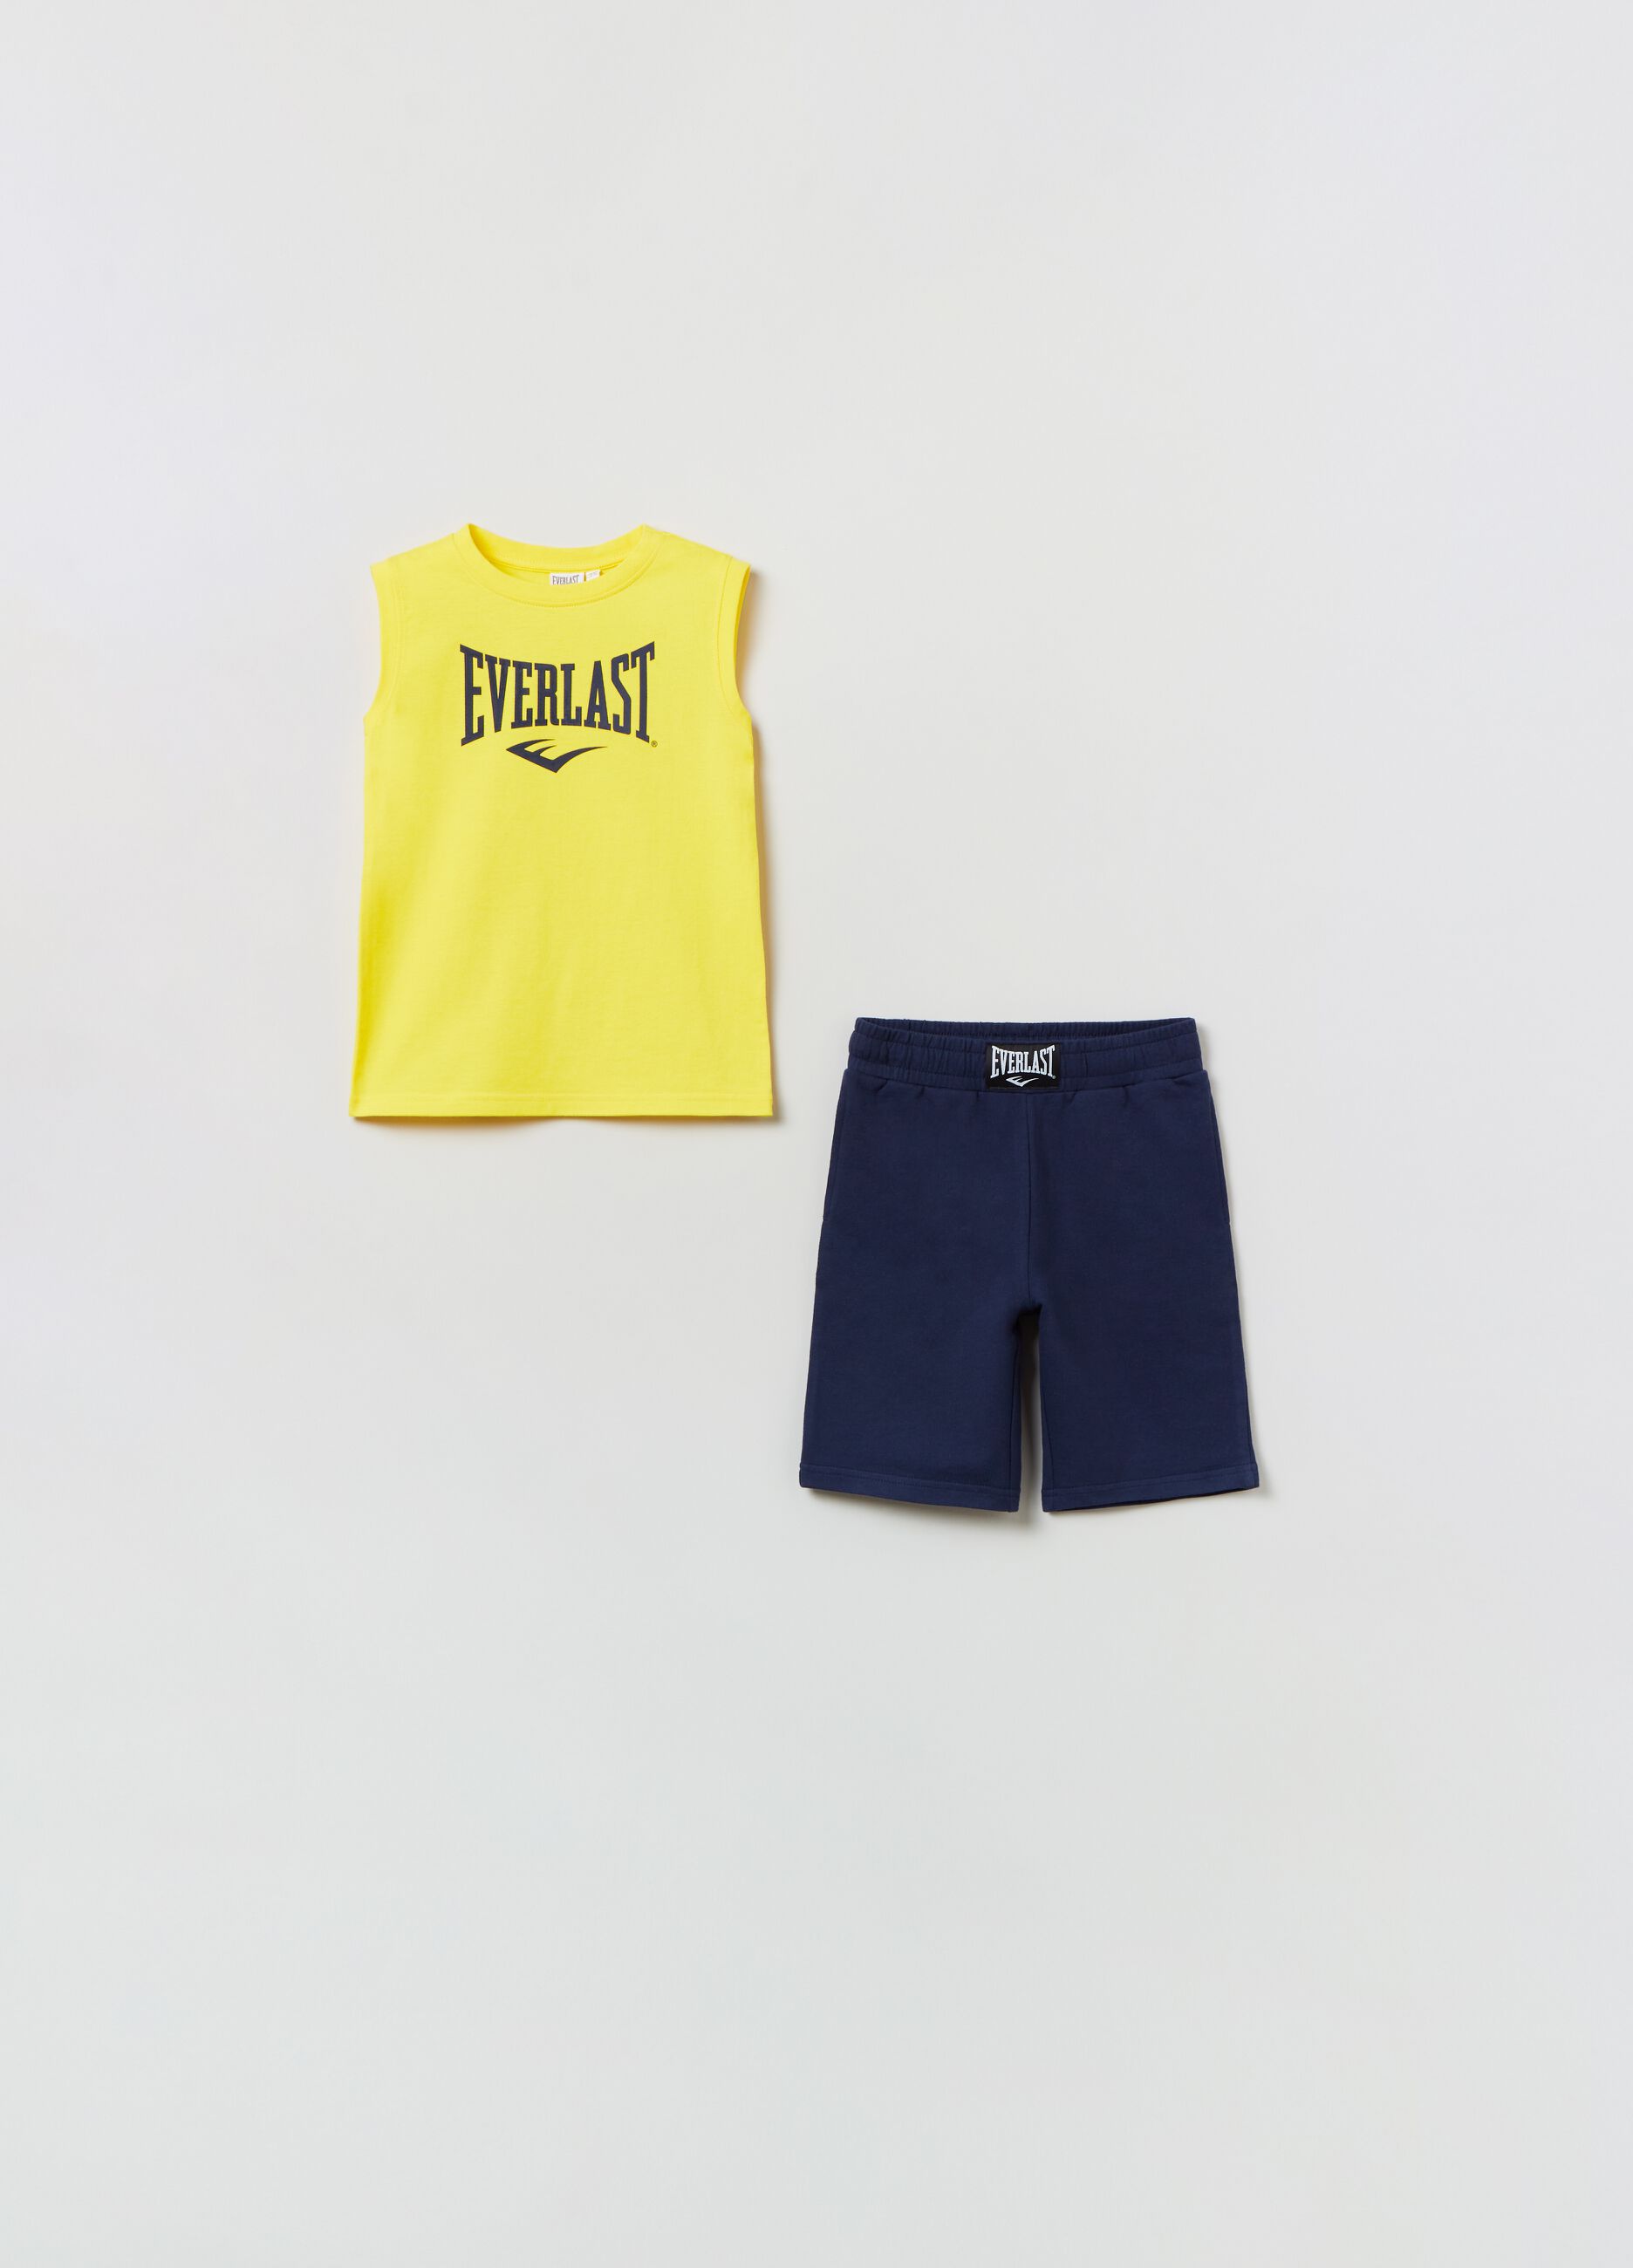 Everlast jogging set with tank top and shorts